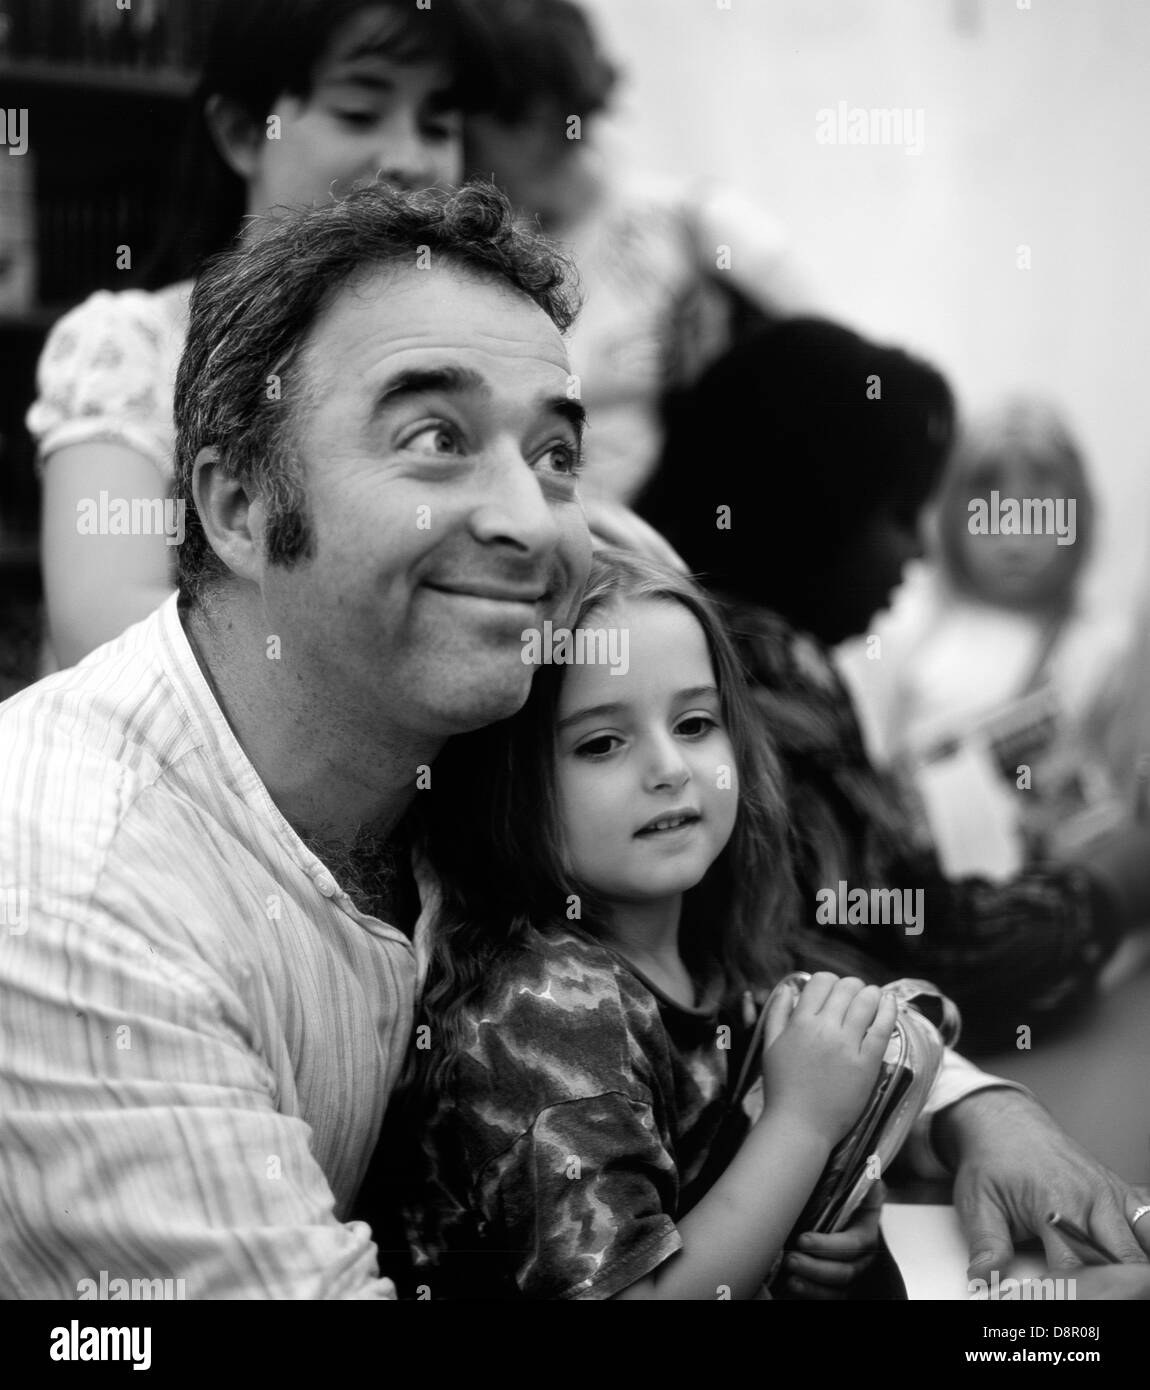 Author Frank Cottrell Boyce and his daughter book-signing in 2004 at the Hay Festival Hay-on-Wye Wales UK Stock Photo